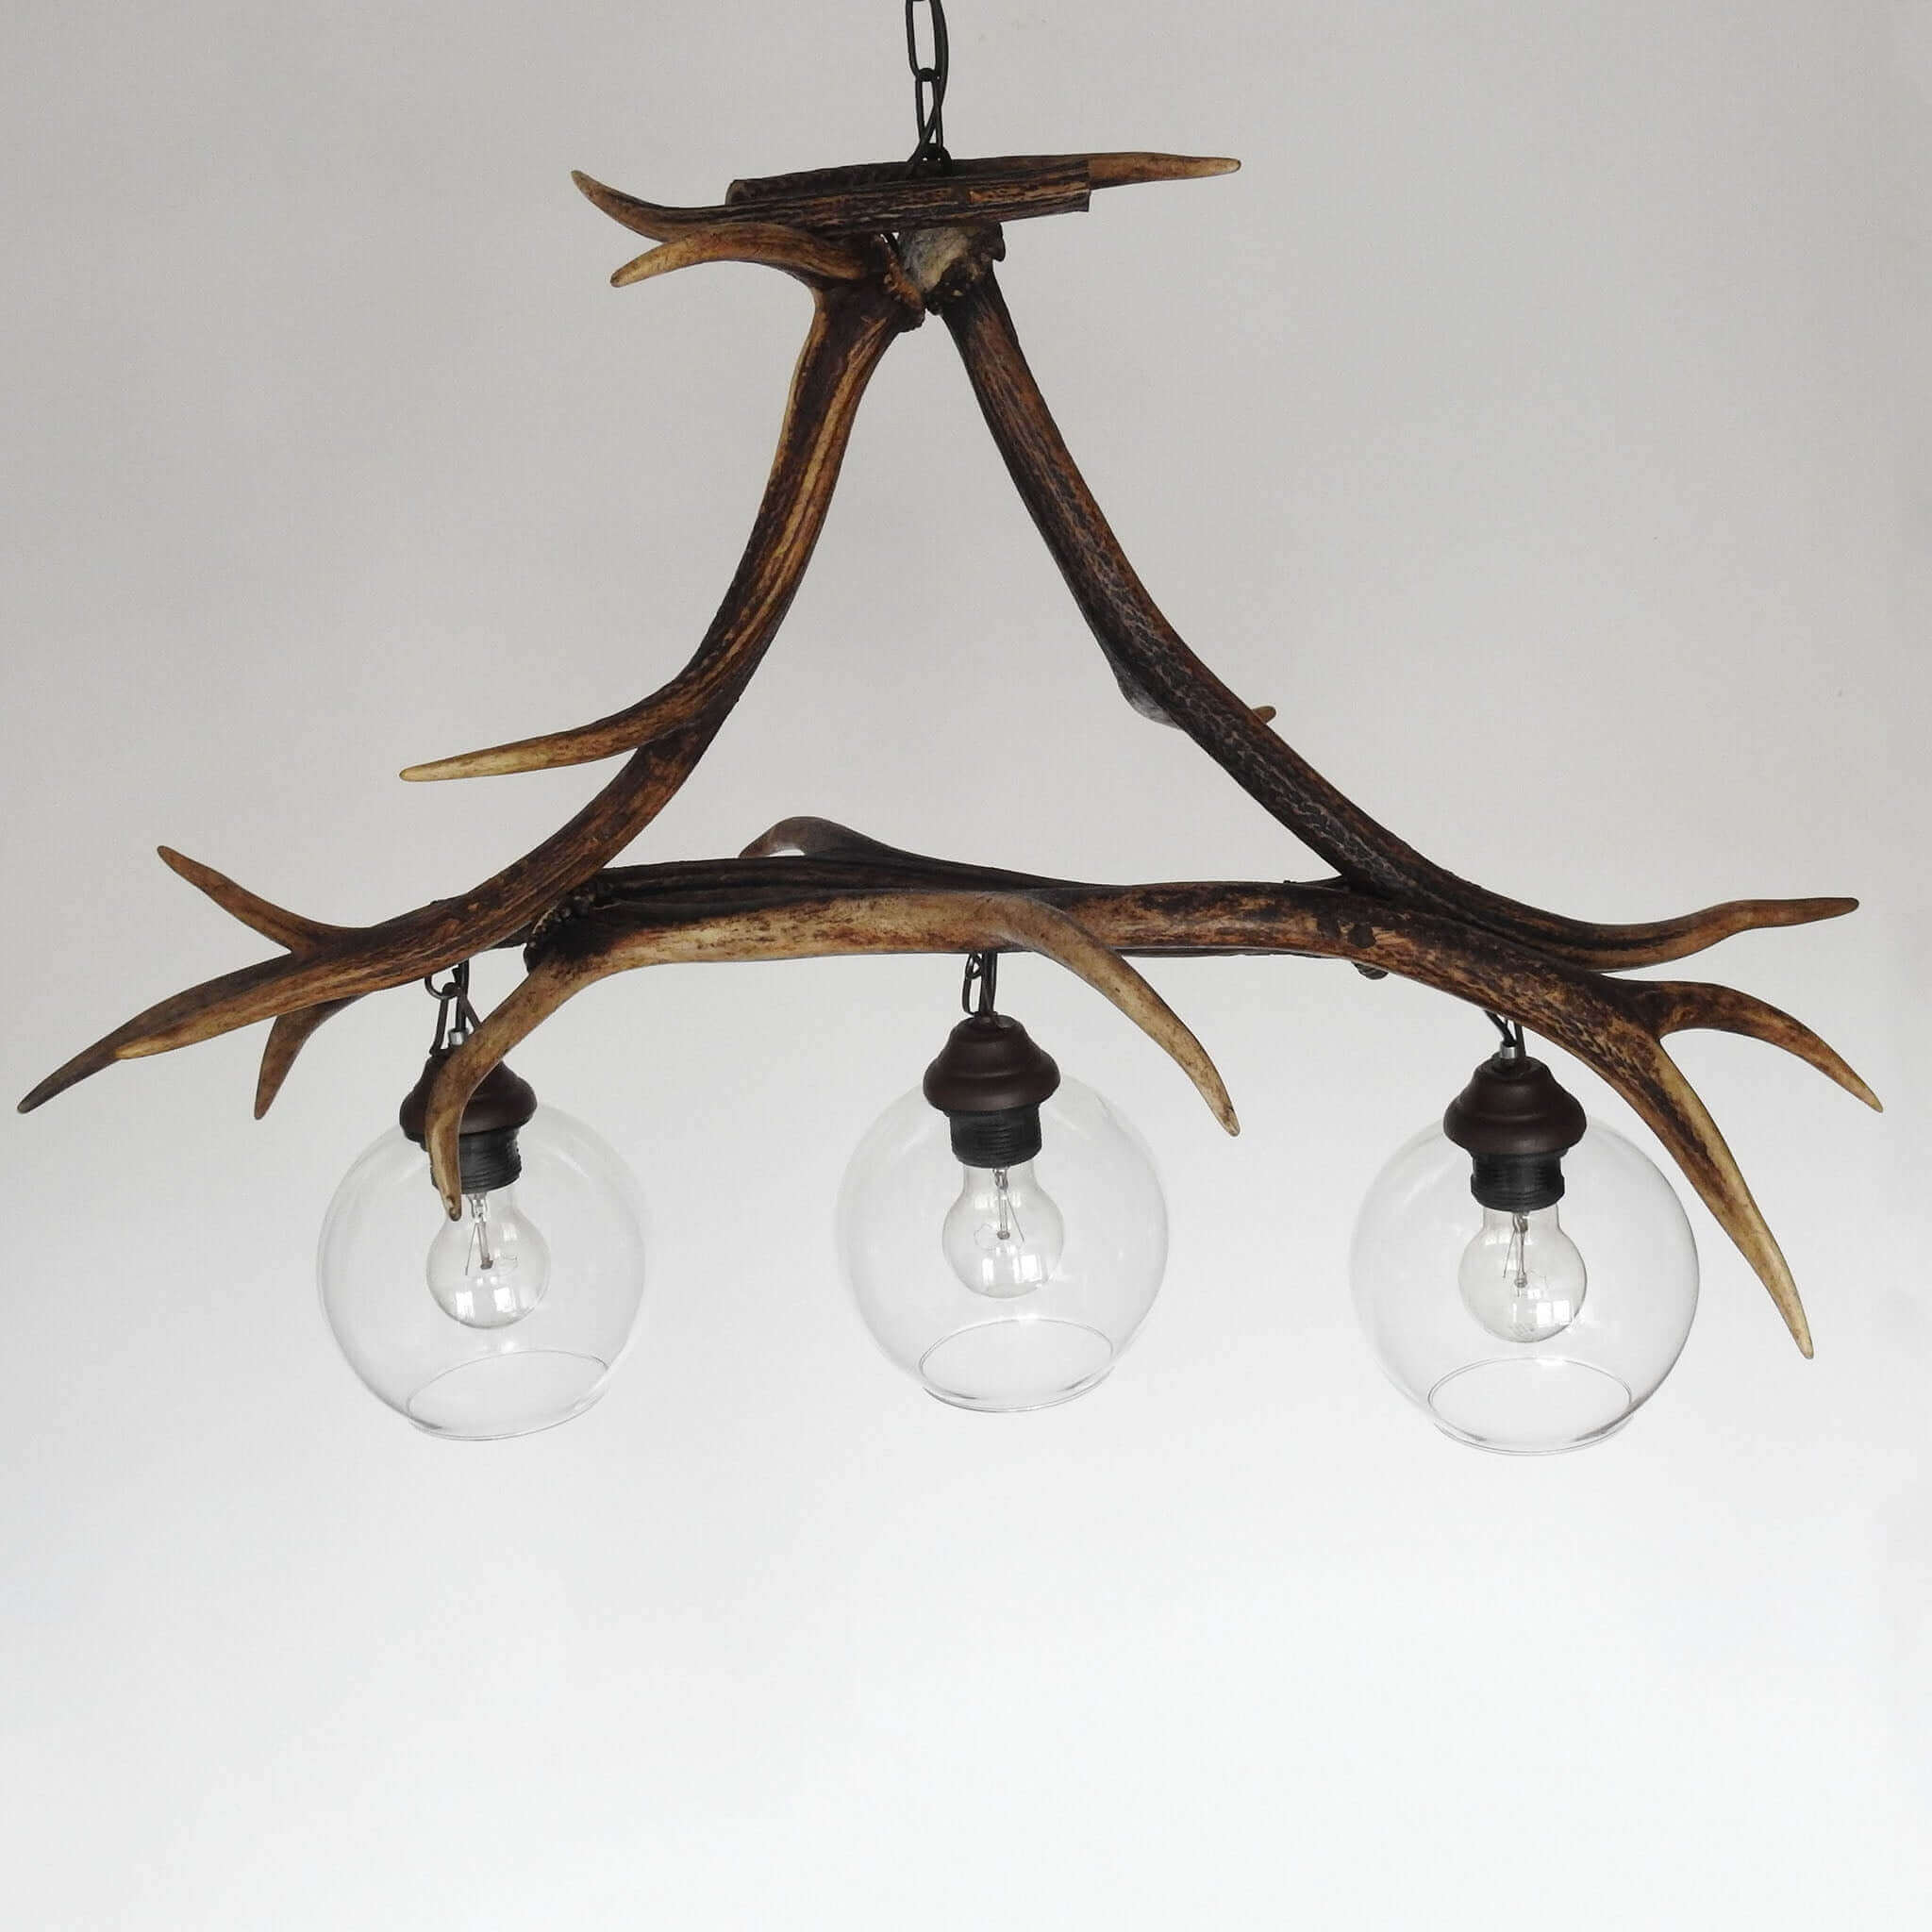 Long-shaped pendant lamp made of authentic red deer antlers - a unique and eye-catching lighting fixture.